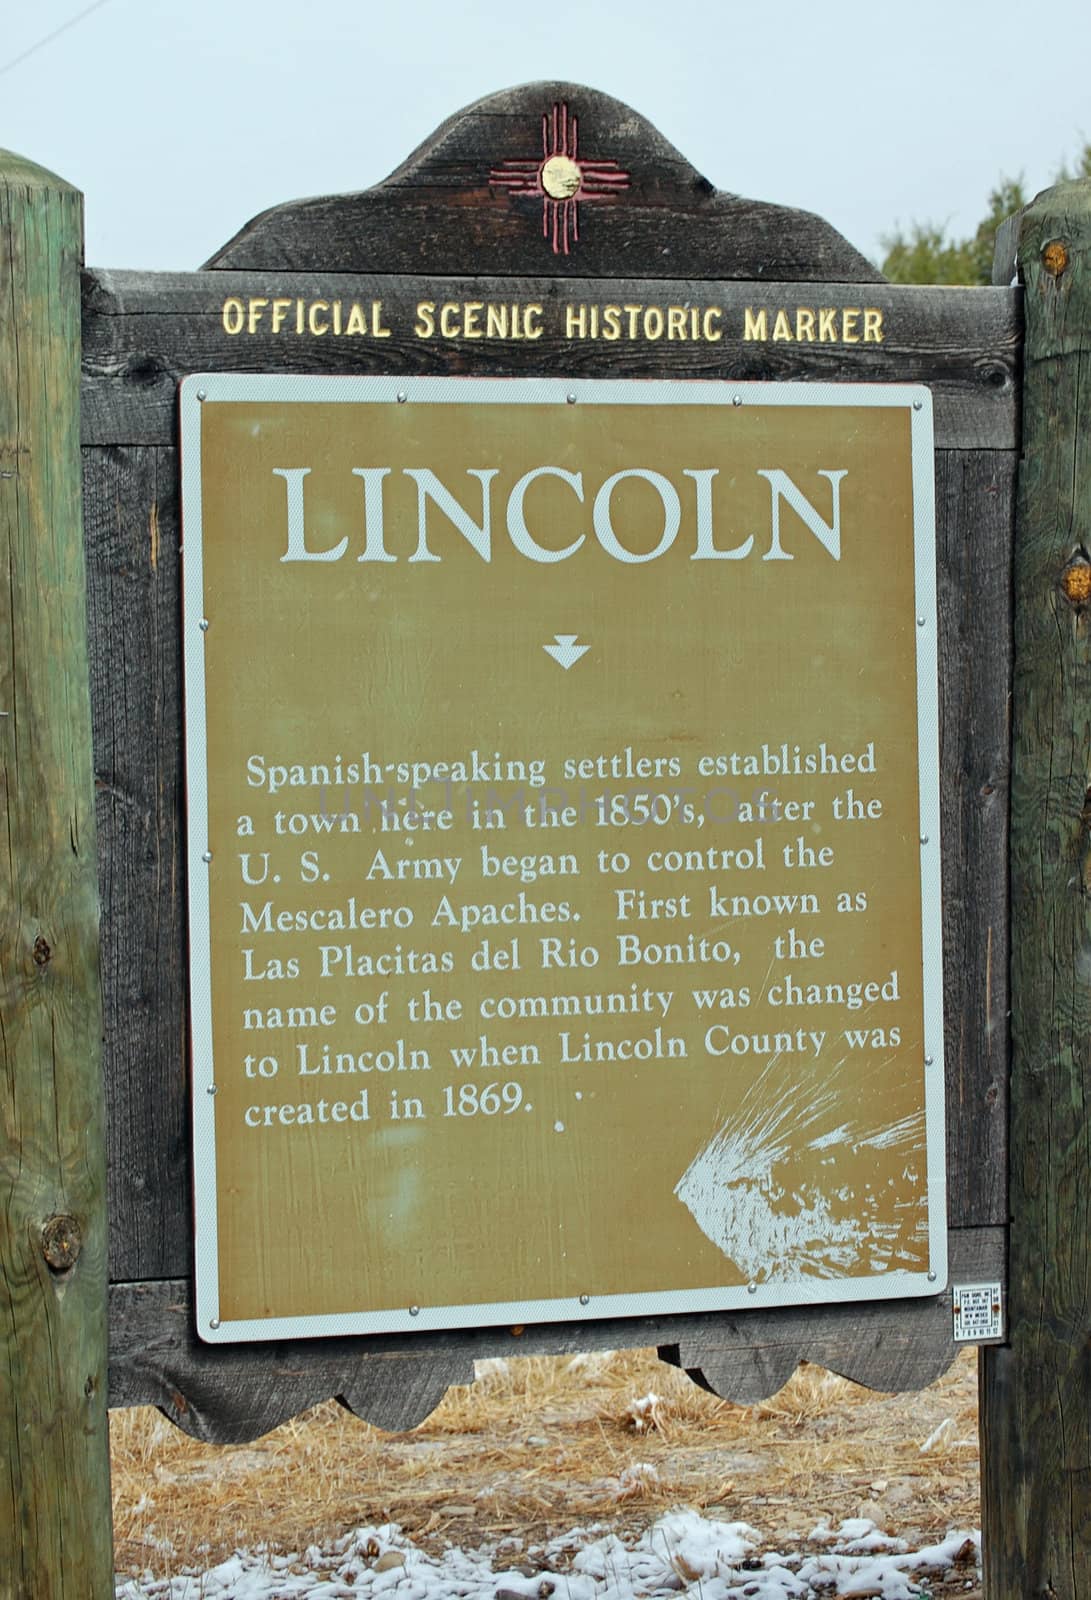 Lincoln New Mexico Official Scenic Historic Marker by RefocusPhoto